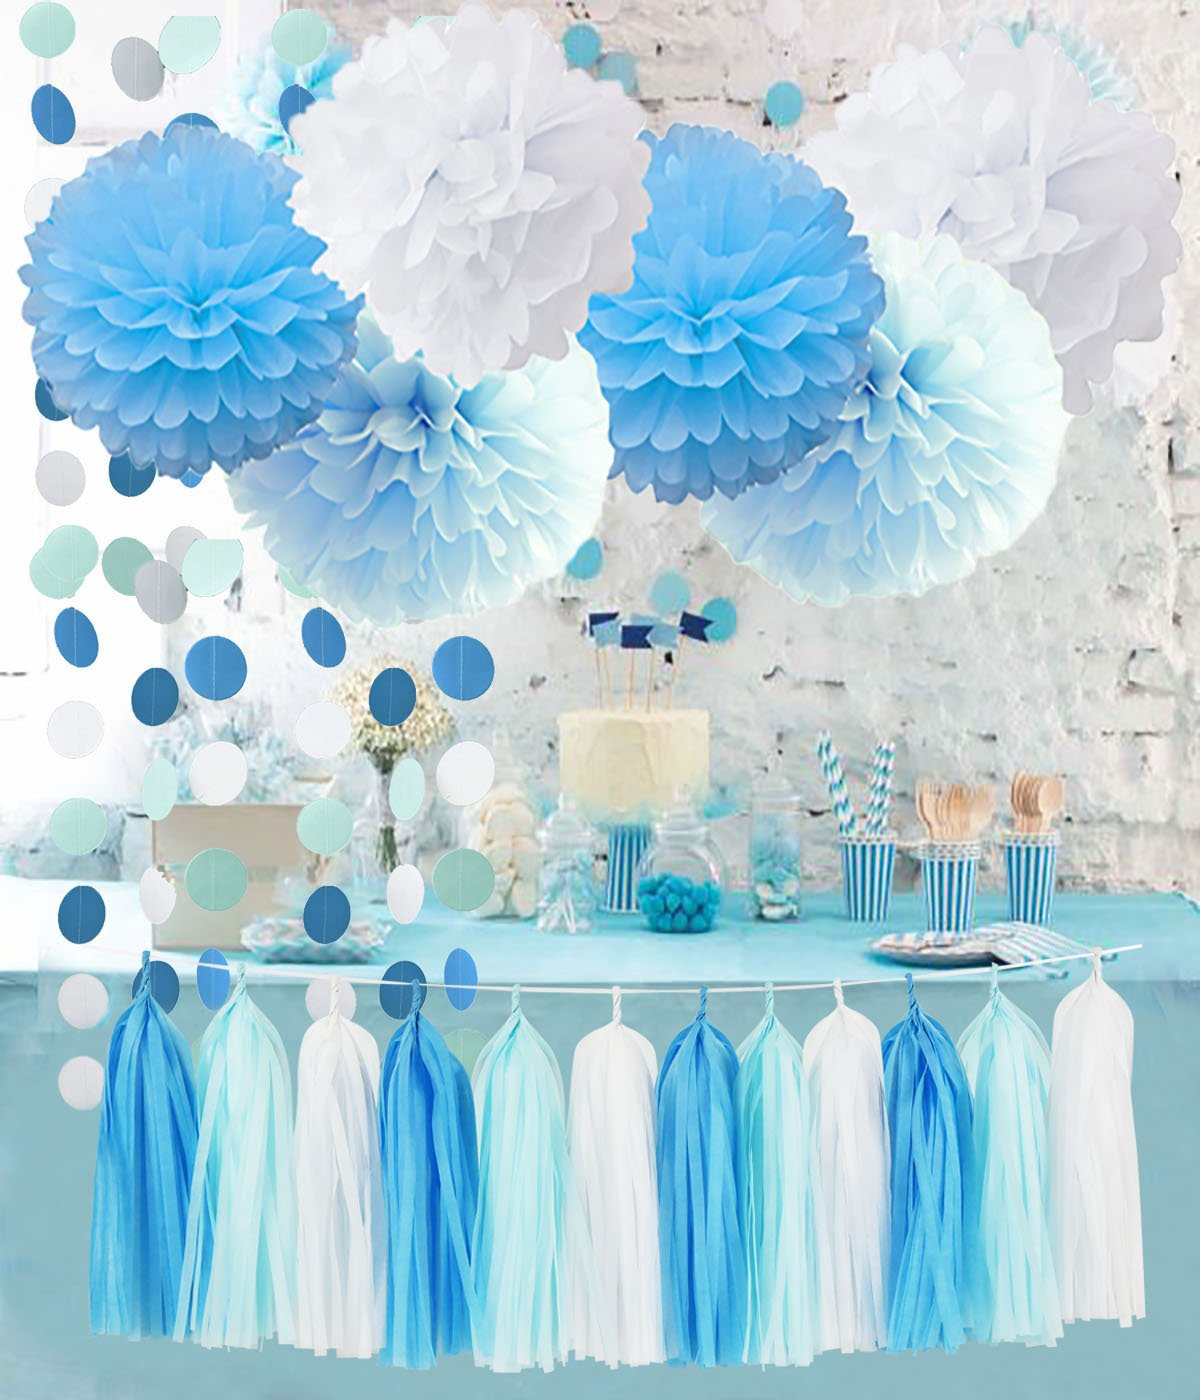 Blue Themed Birthday Party Ideas
 White and Blue Birthday Decorations Amazon